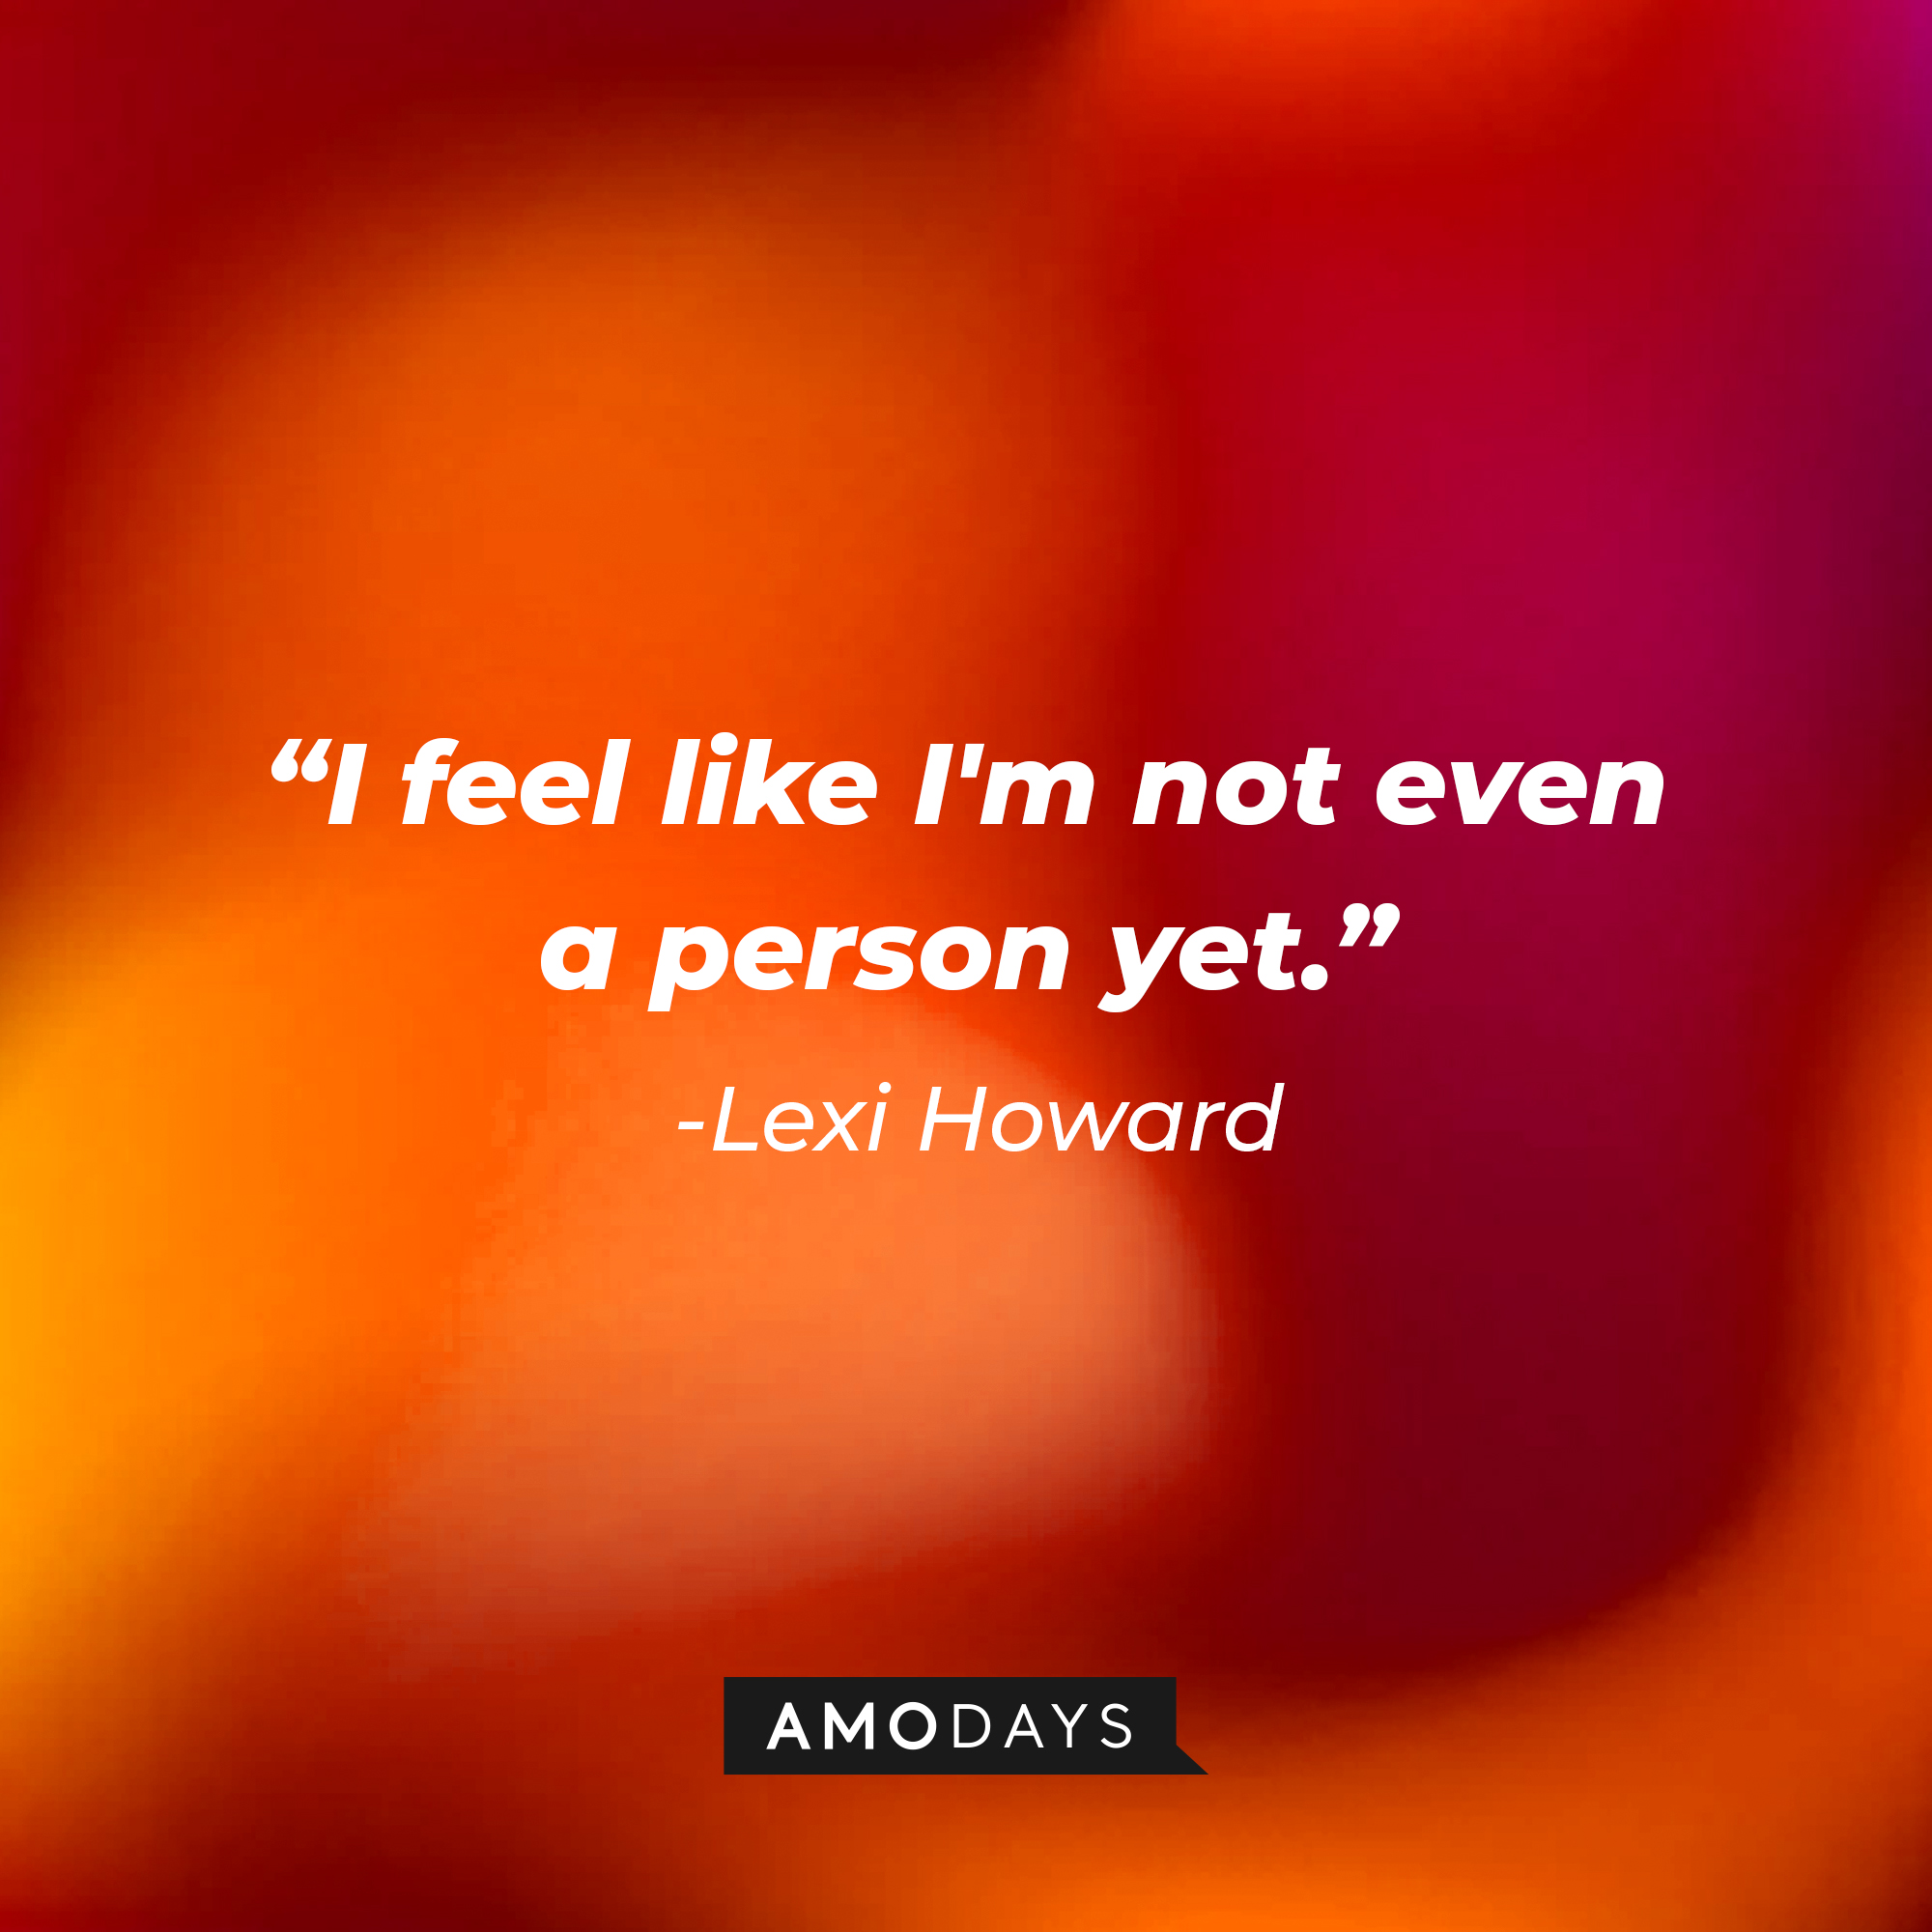 Lexi Howard’s quote: “I feel like I'm not even a person yet.” | Source: AmoDays